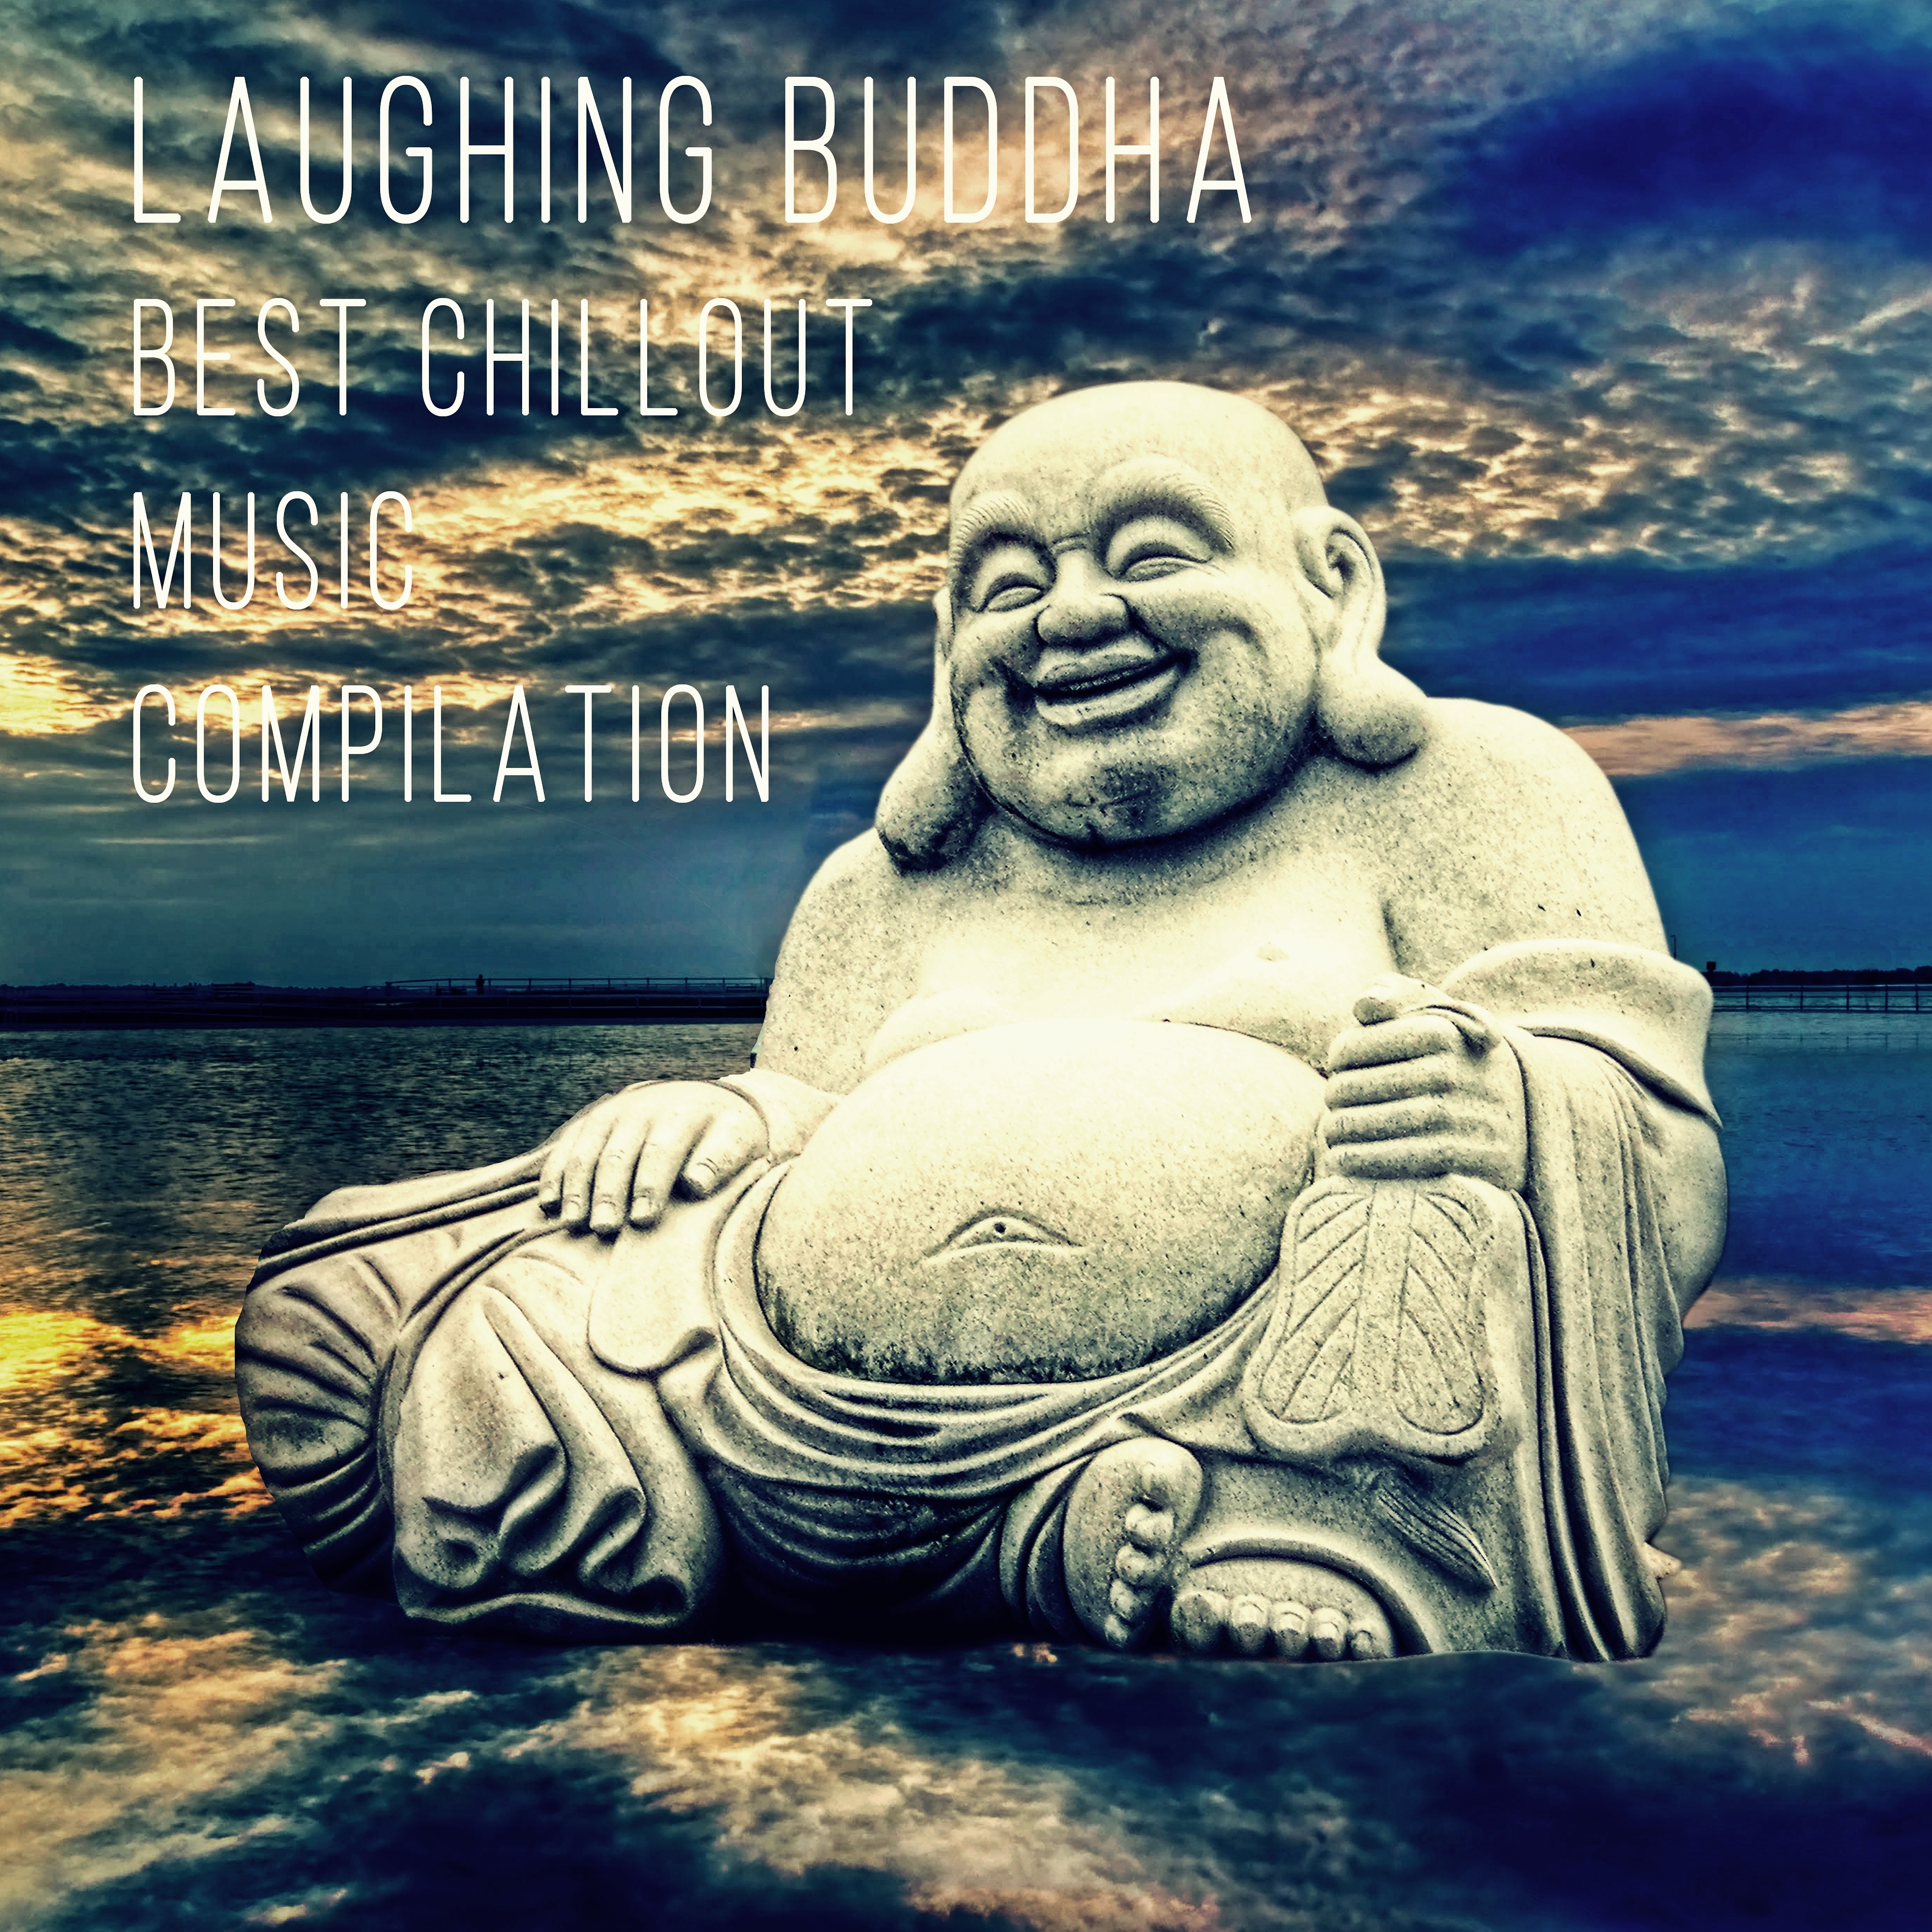 Laughing Buddha - Best Chillout Music Compilation, Open Your Mind and Relax with Nature Sounds, Practice Yoga Poses for Body Balance and Spirit Sanctification, Feel Positive Energy and Inner Power